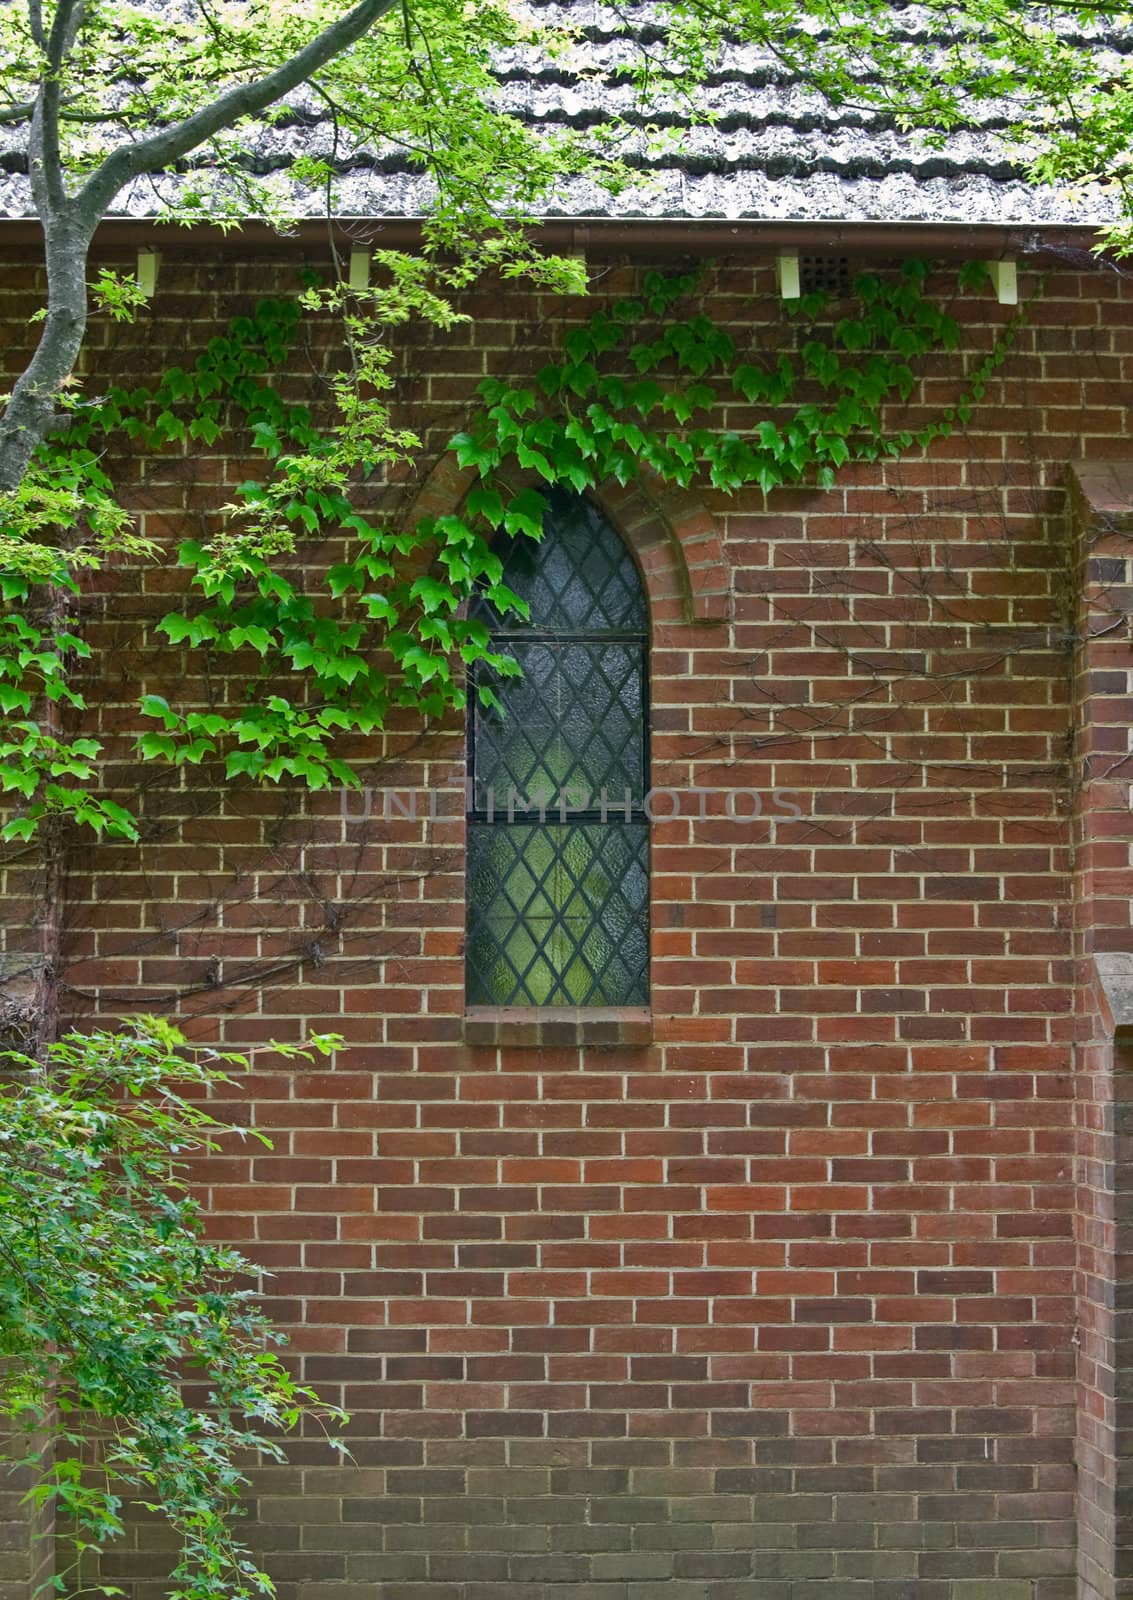 beautiful gostwyck chapel all covered in green spring vines